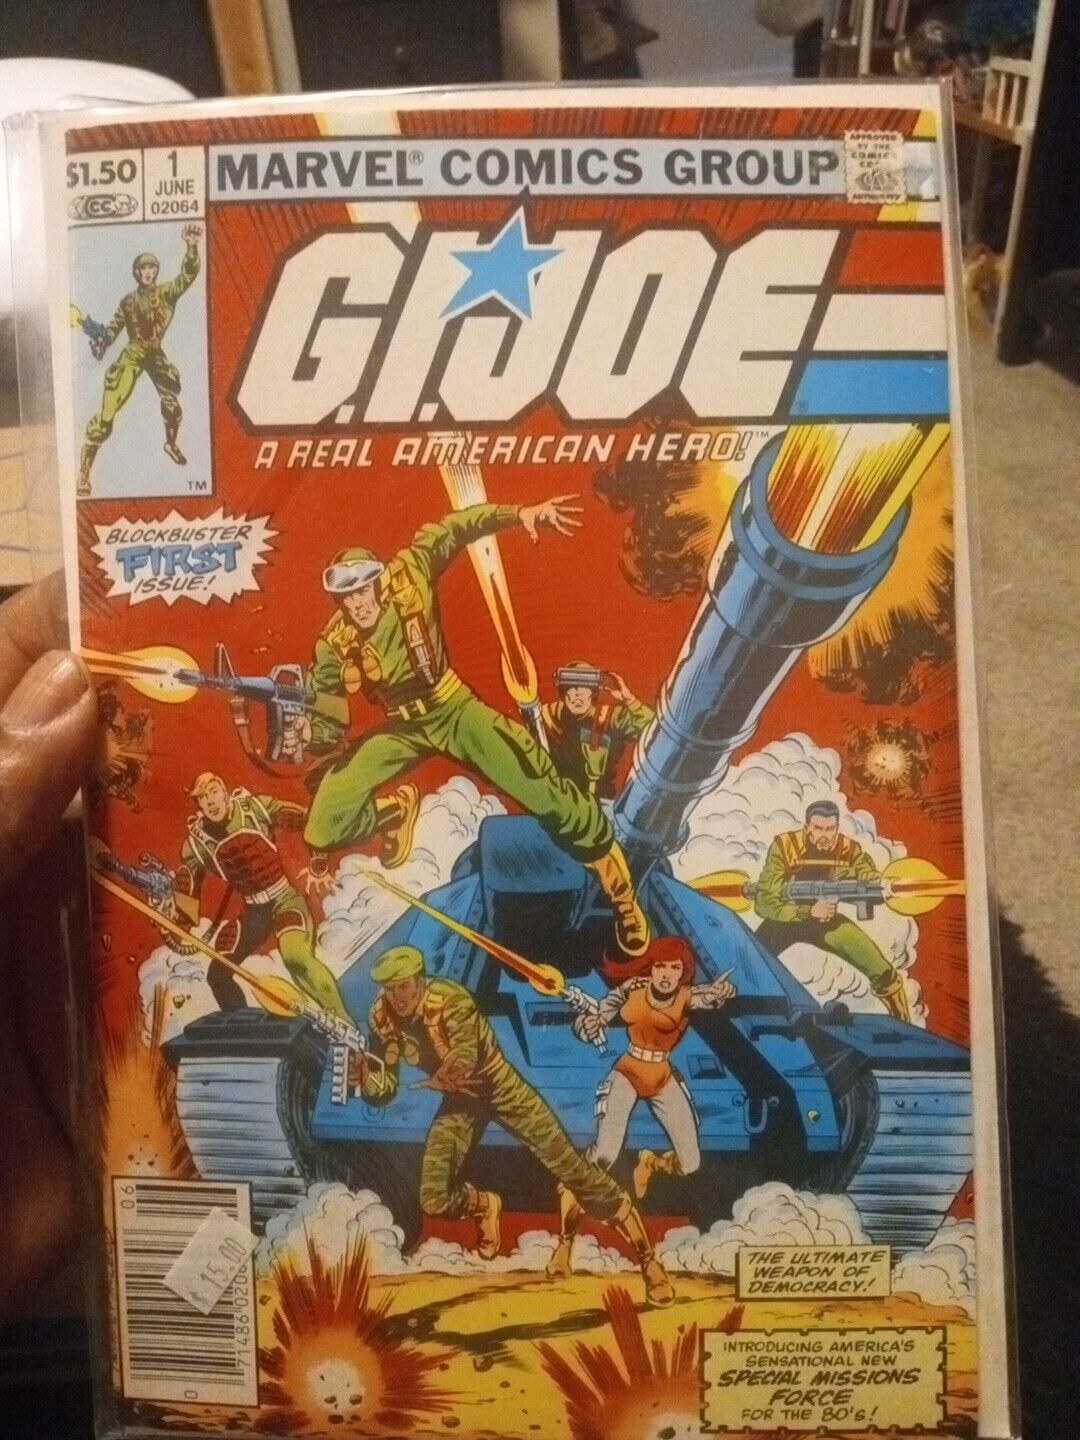 GI Joe #1 - Marvel Comics - First Issue - 1982 - First Appearance